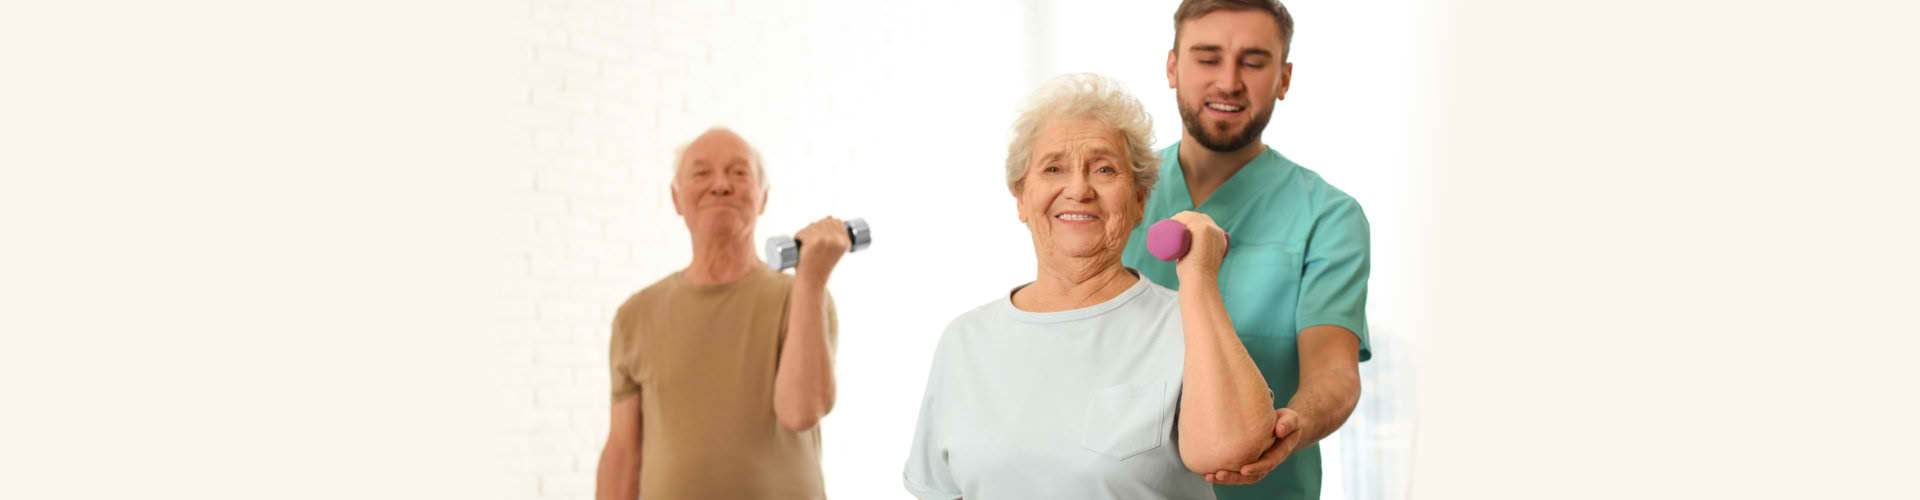 man helping elderly man and woman to workout